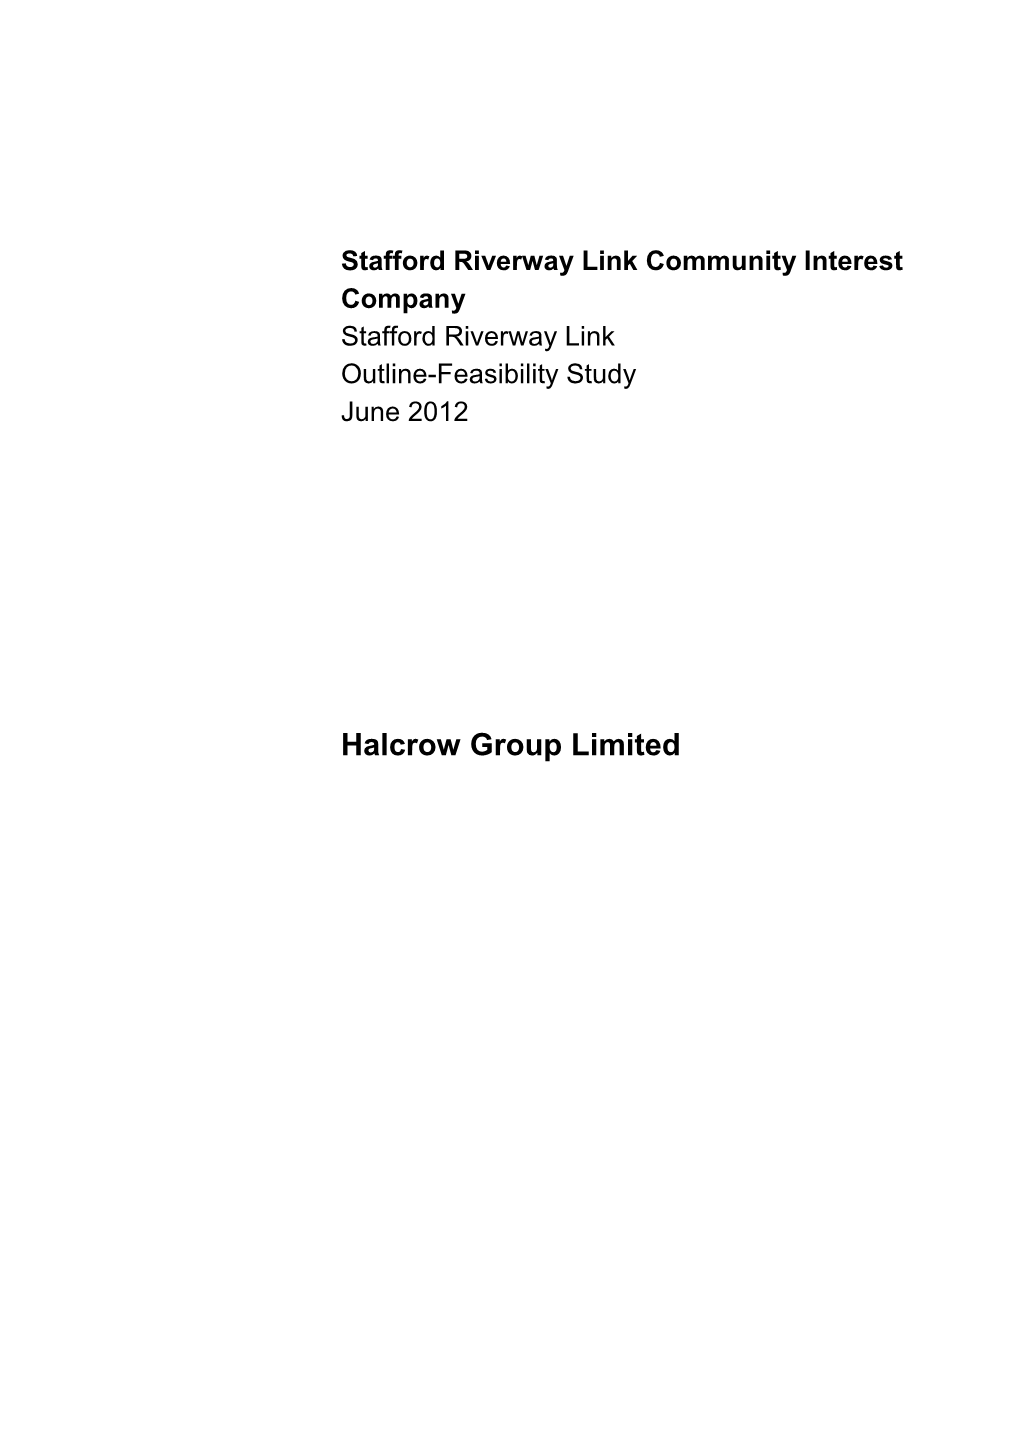 Halcrow Group Limited